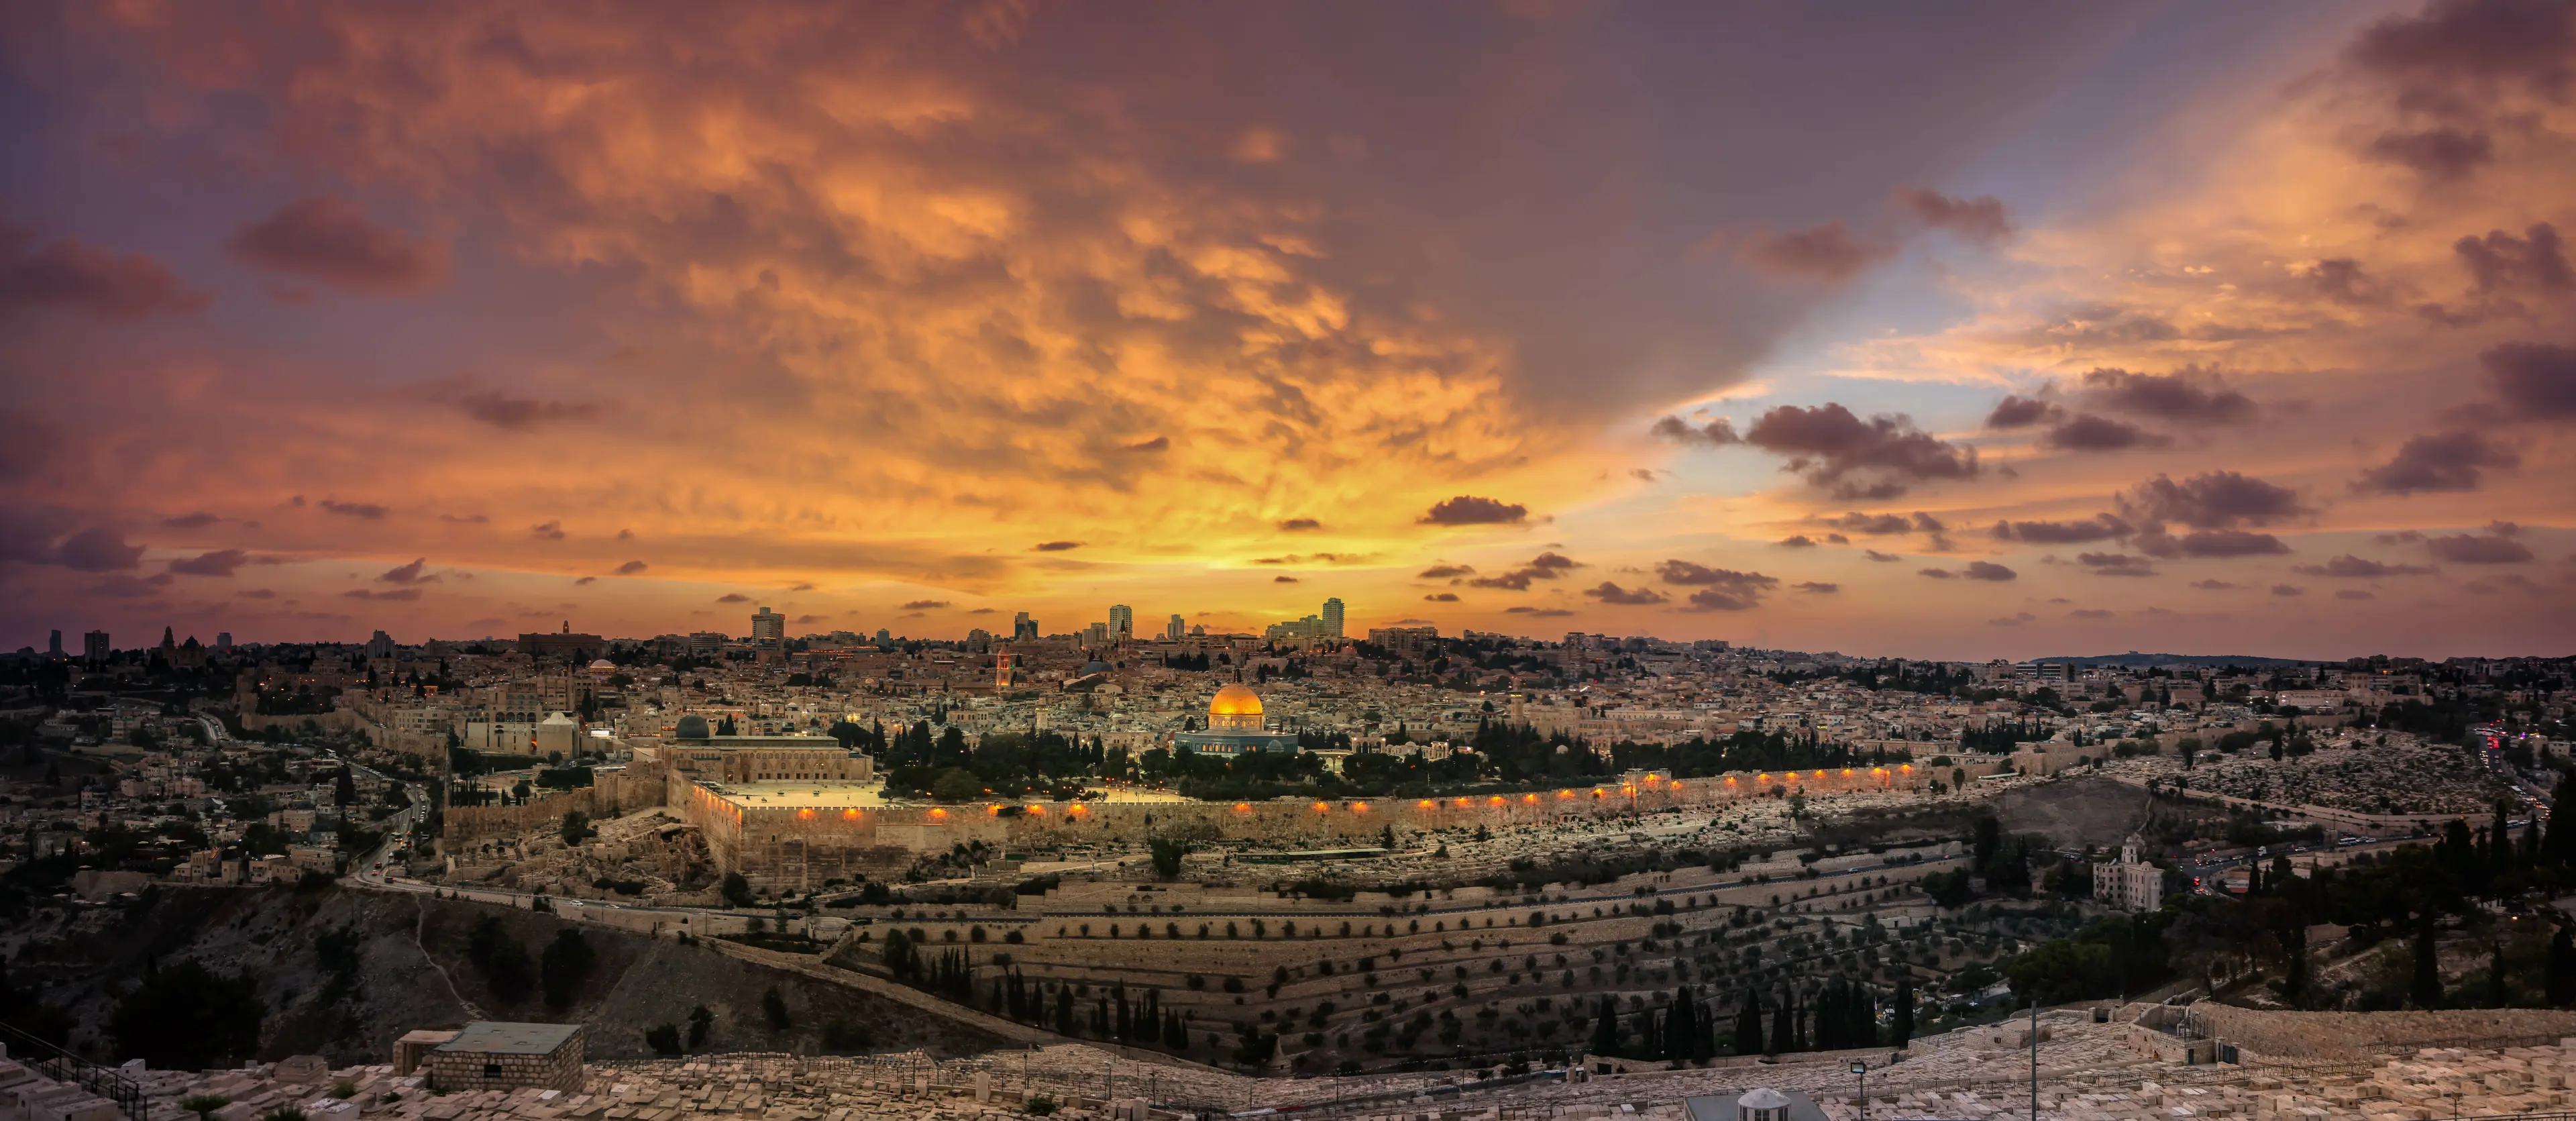 The old city and Temple Mount from the Mount of Olives